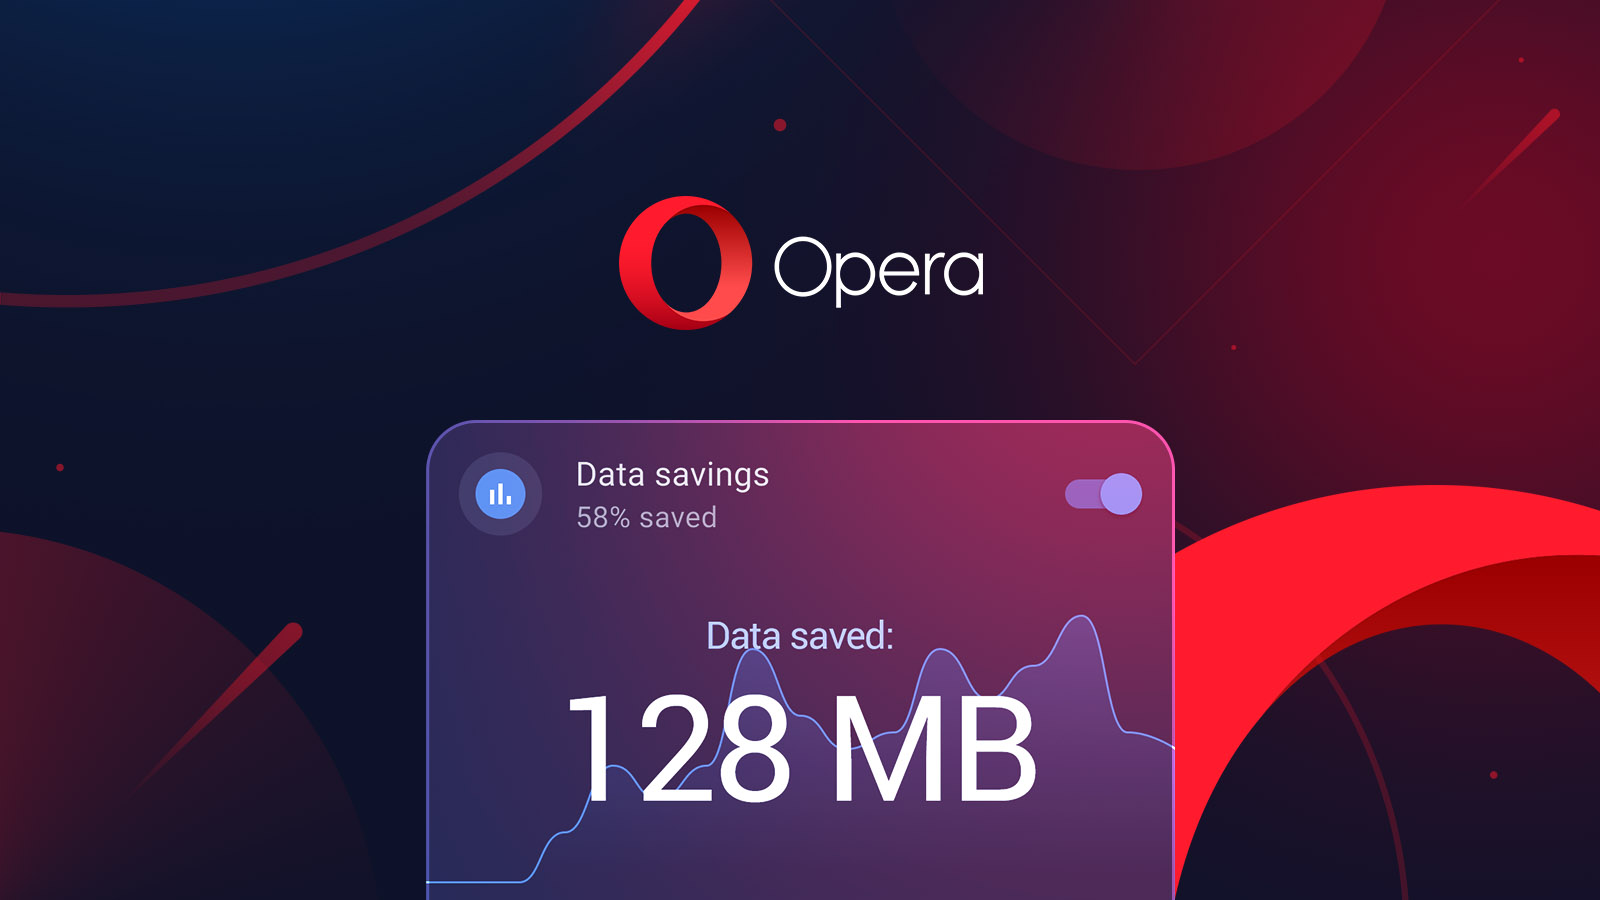 Opera for Android data savings